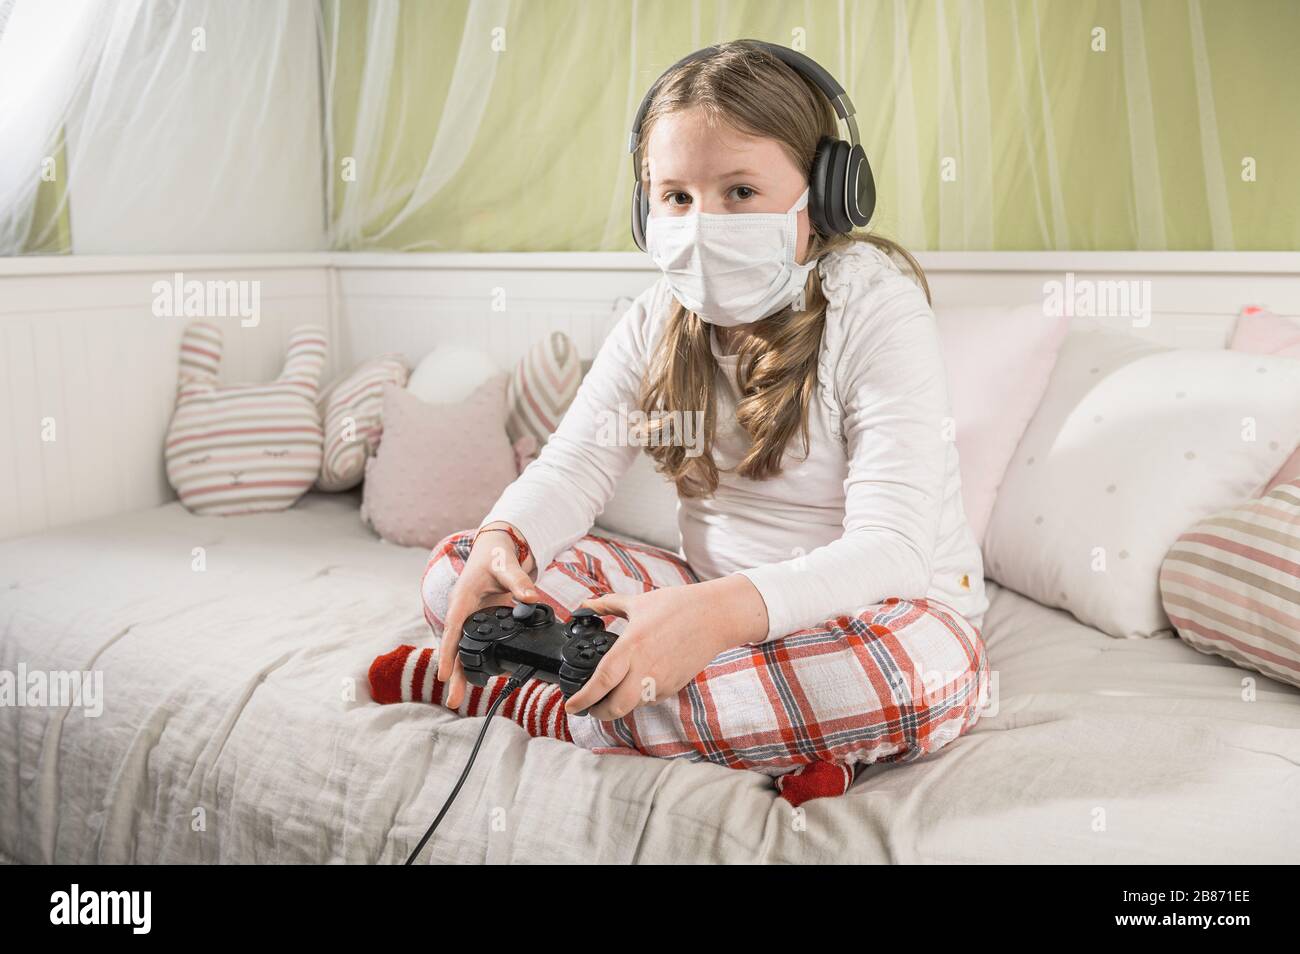 Girl in a mask playing on a game console during quarantine on the bed. Stock Photo